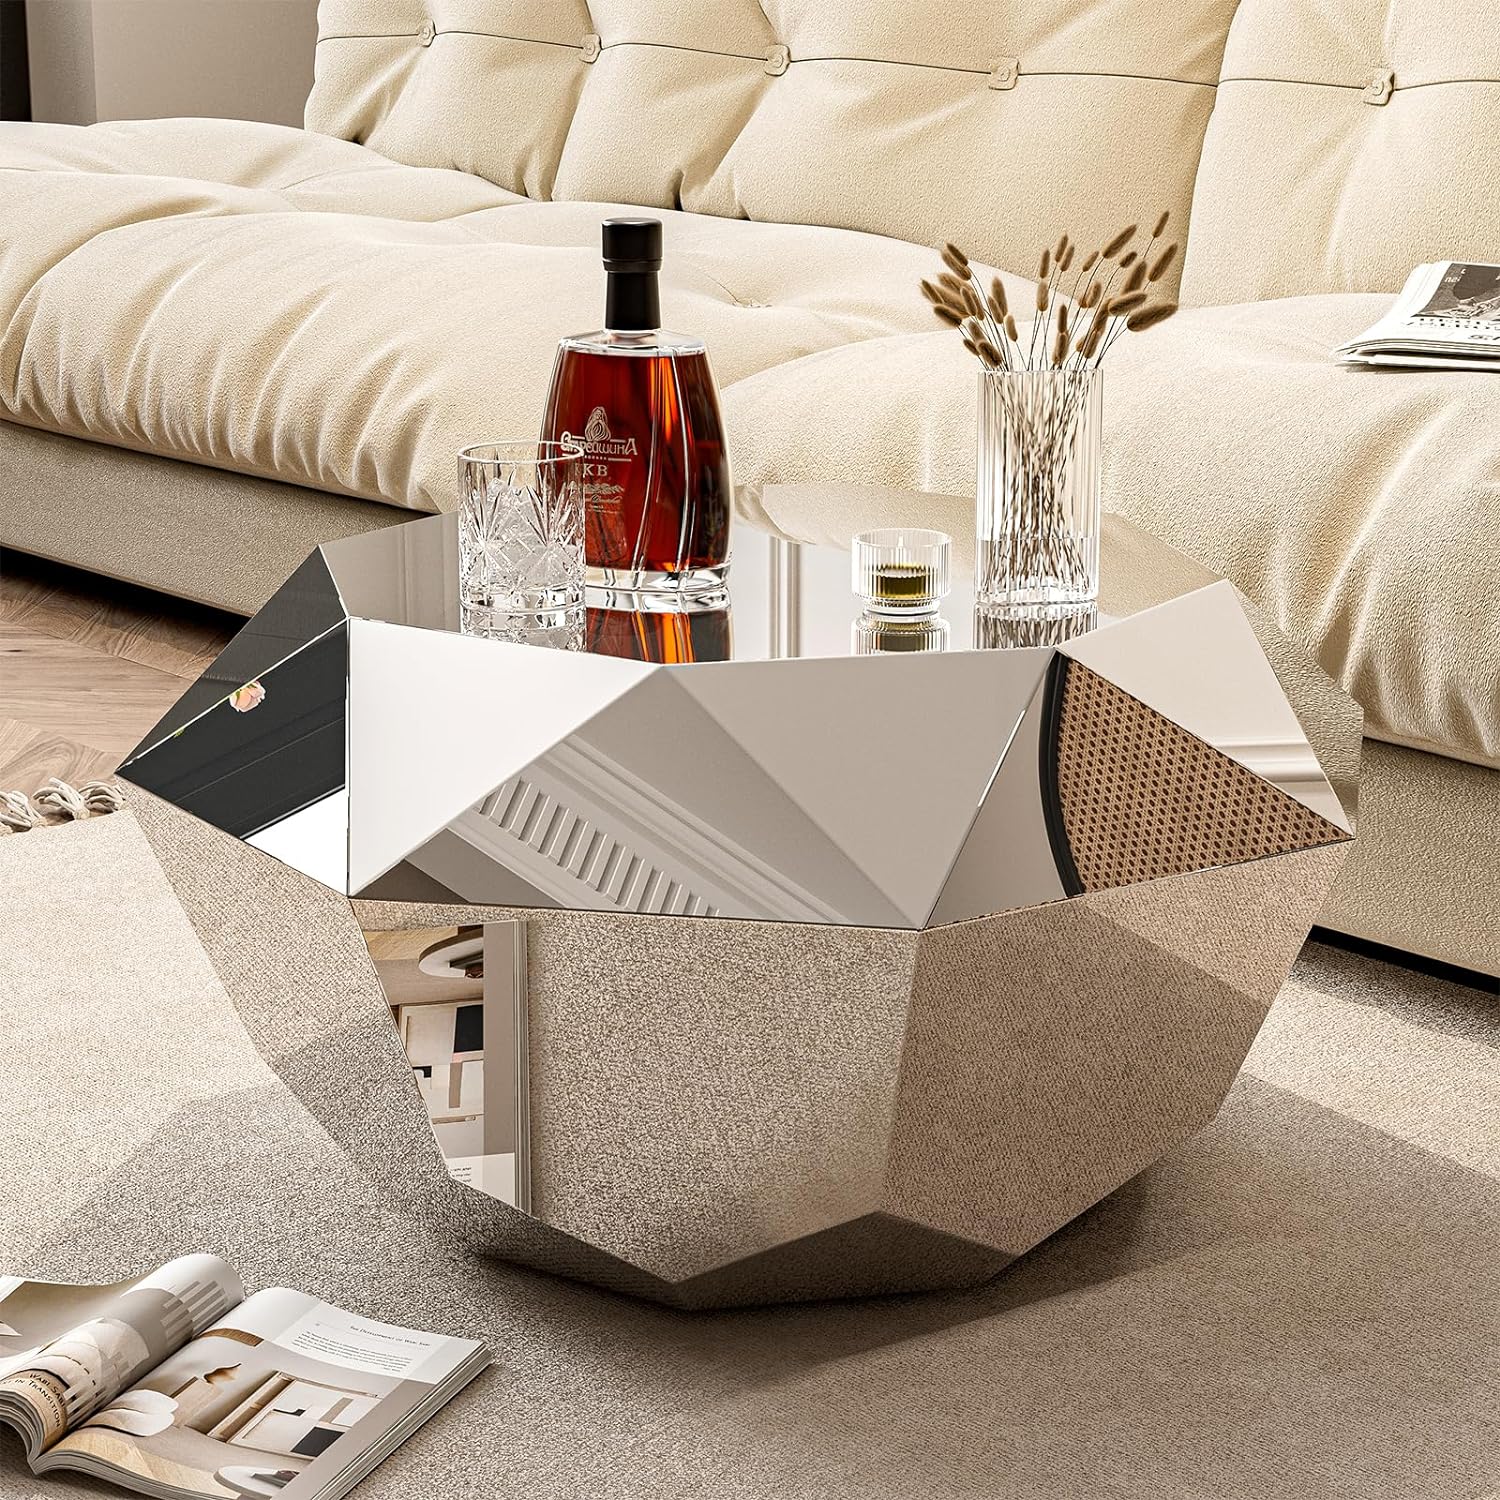 IKIFLY Modern Silver Stainless Coffee Table, Large Diamond Fashion Design Accent Table End Table for Living Room Bedroom